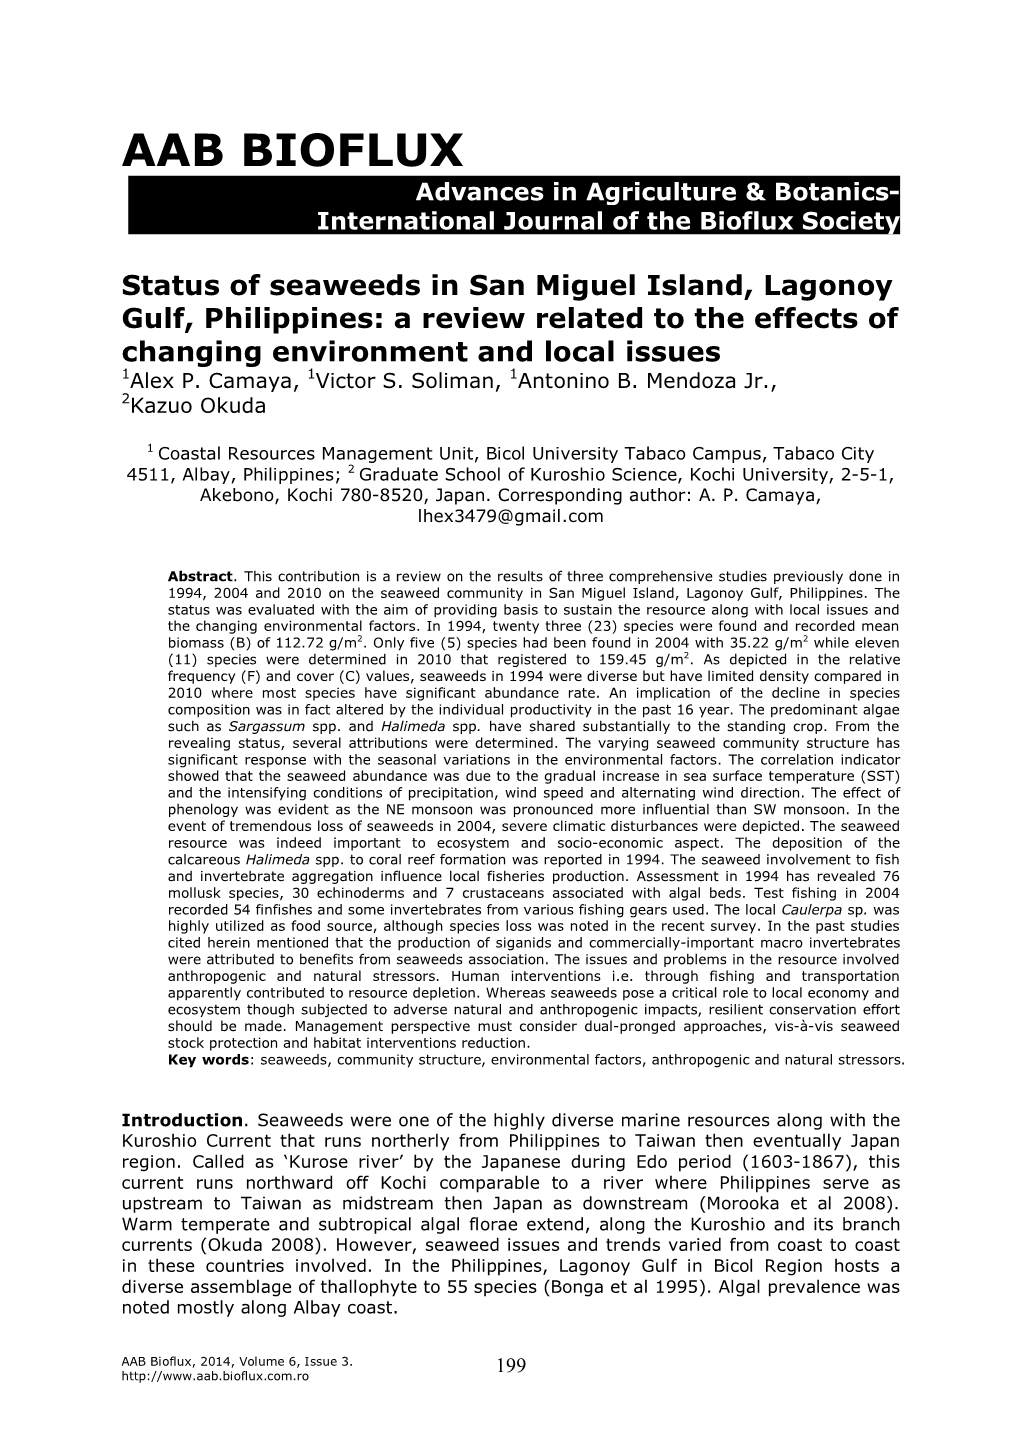 Status of Seaweeds in San Miguel Island, Lagonoy Gulf, Philippines: a Review Related to the Effects of Changing Environment and Local Issues 1Alex P